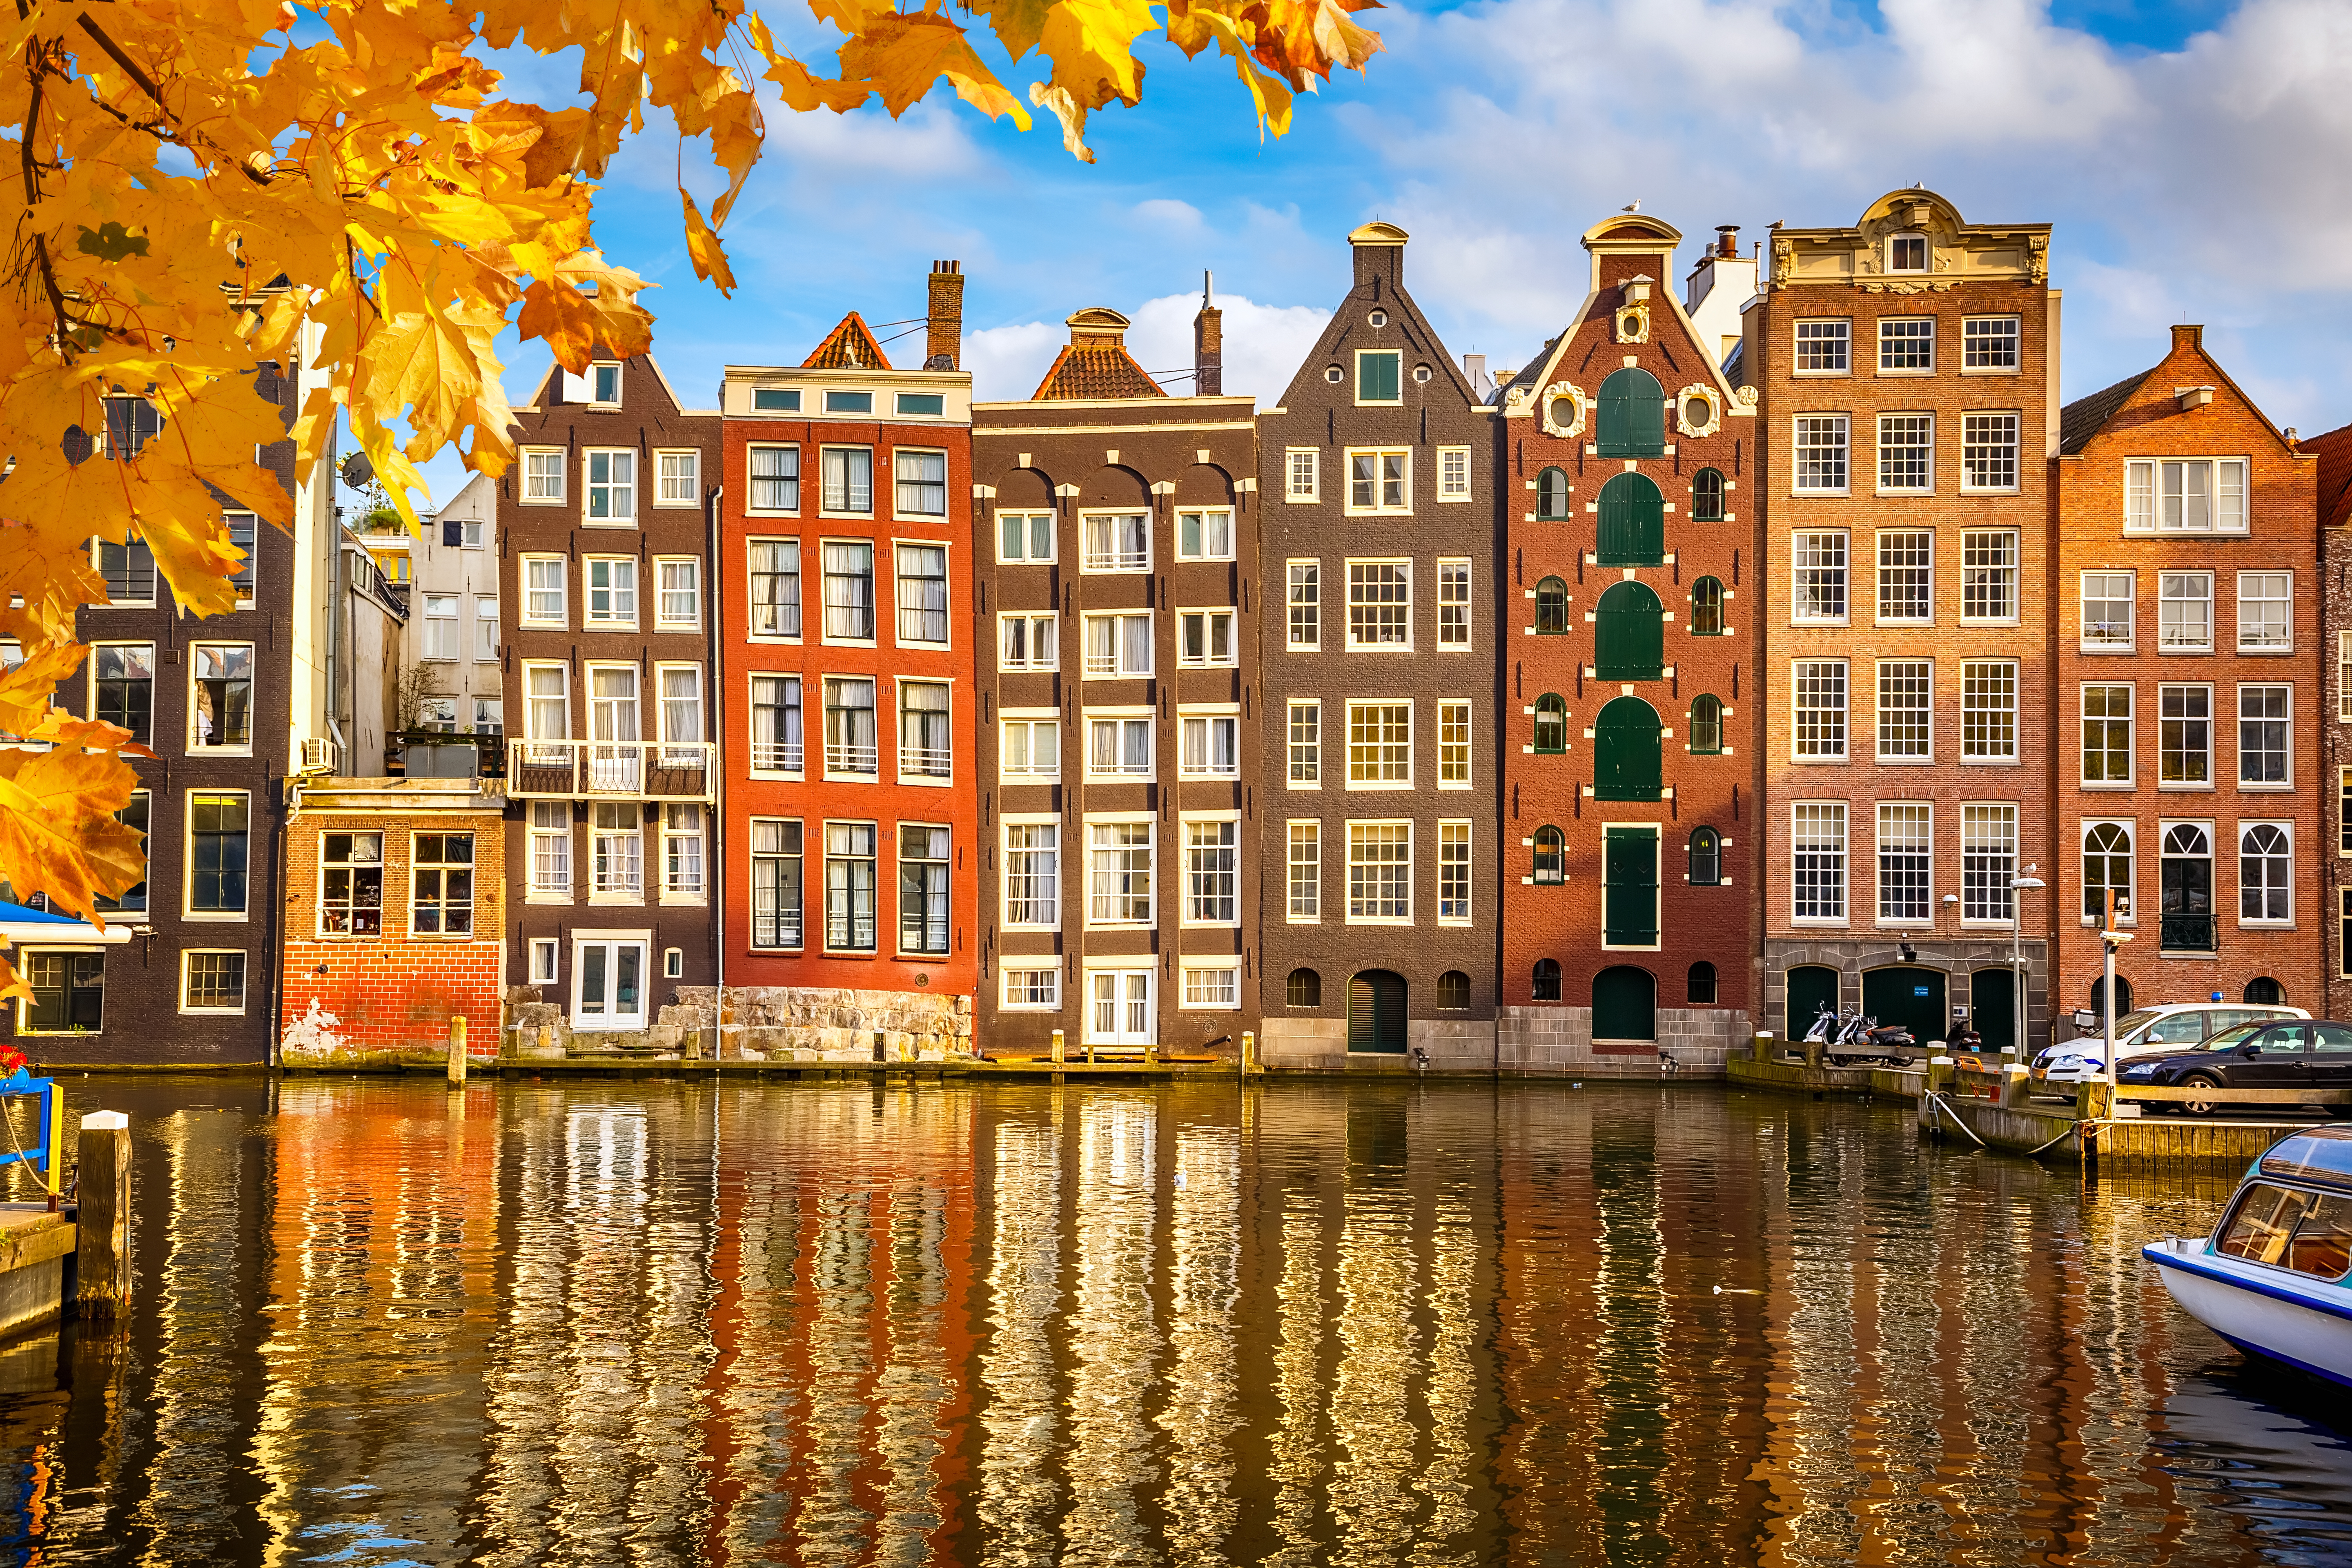 Best Things to Do in Amsterdam with Family - Old Buildings in Amsterdam